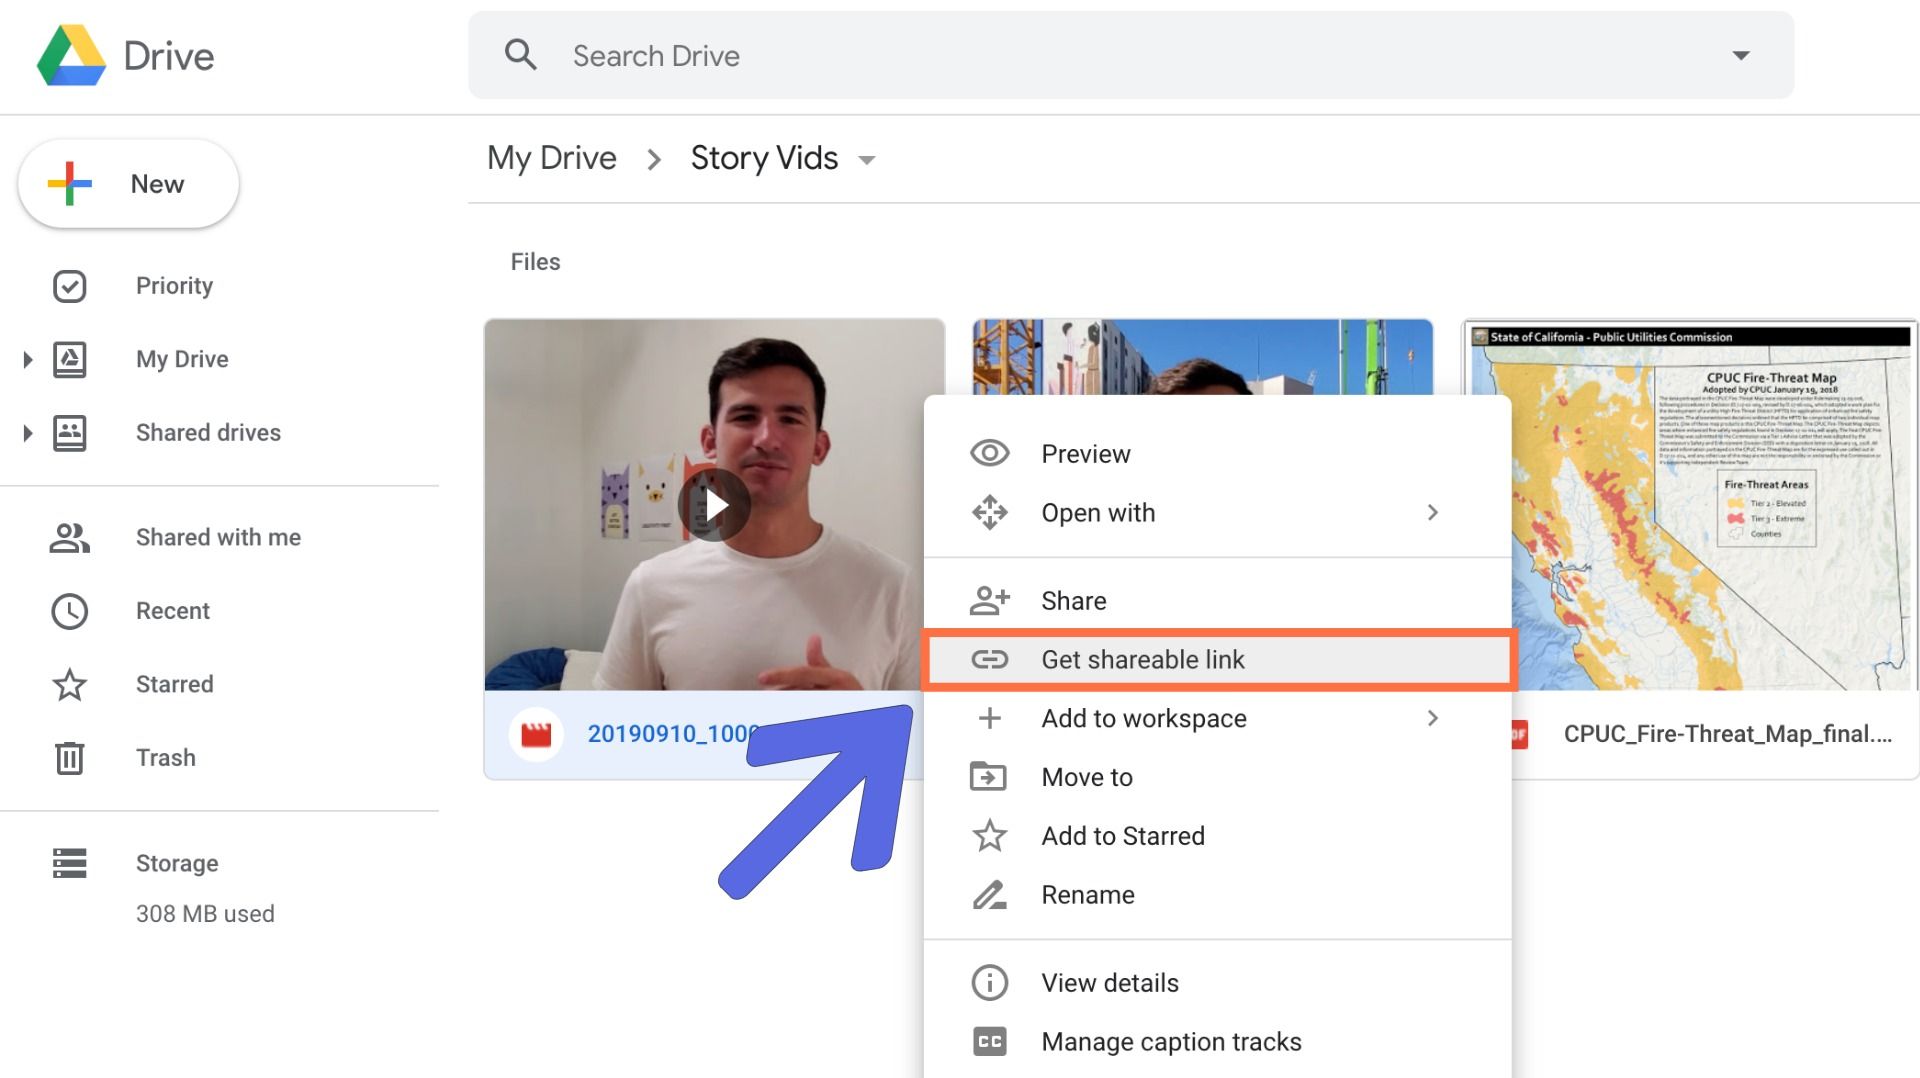 A screenshot from Google Drive, showing how to get a shareable link to a video.